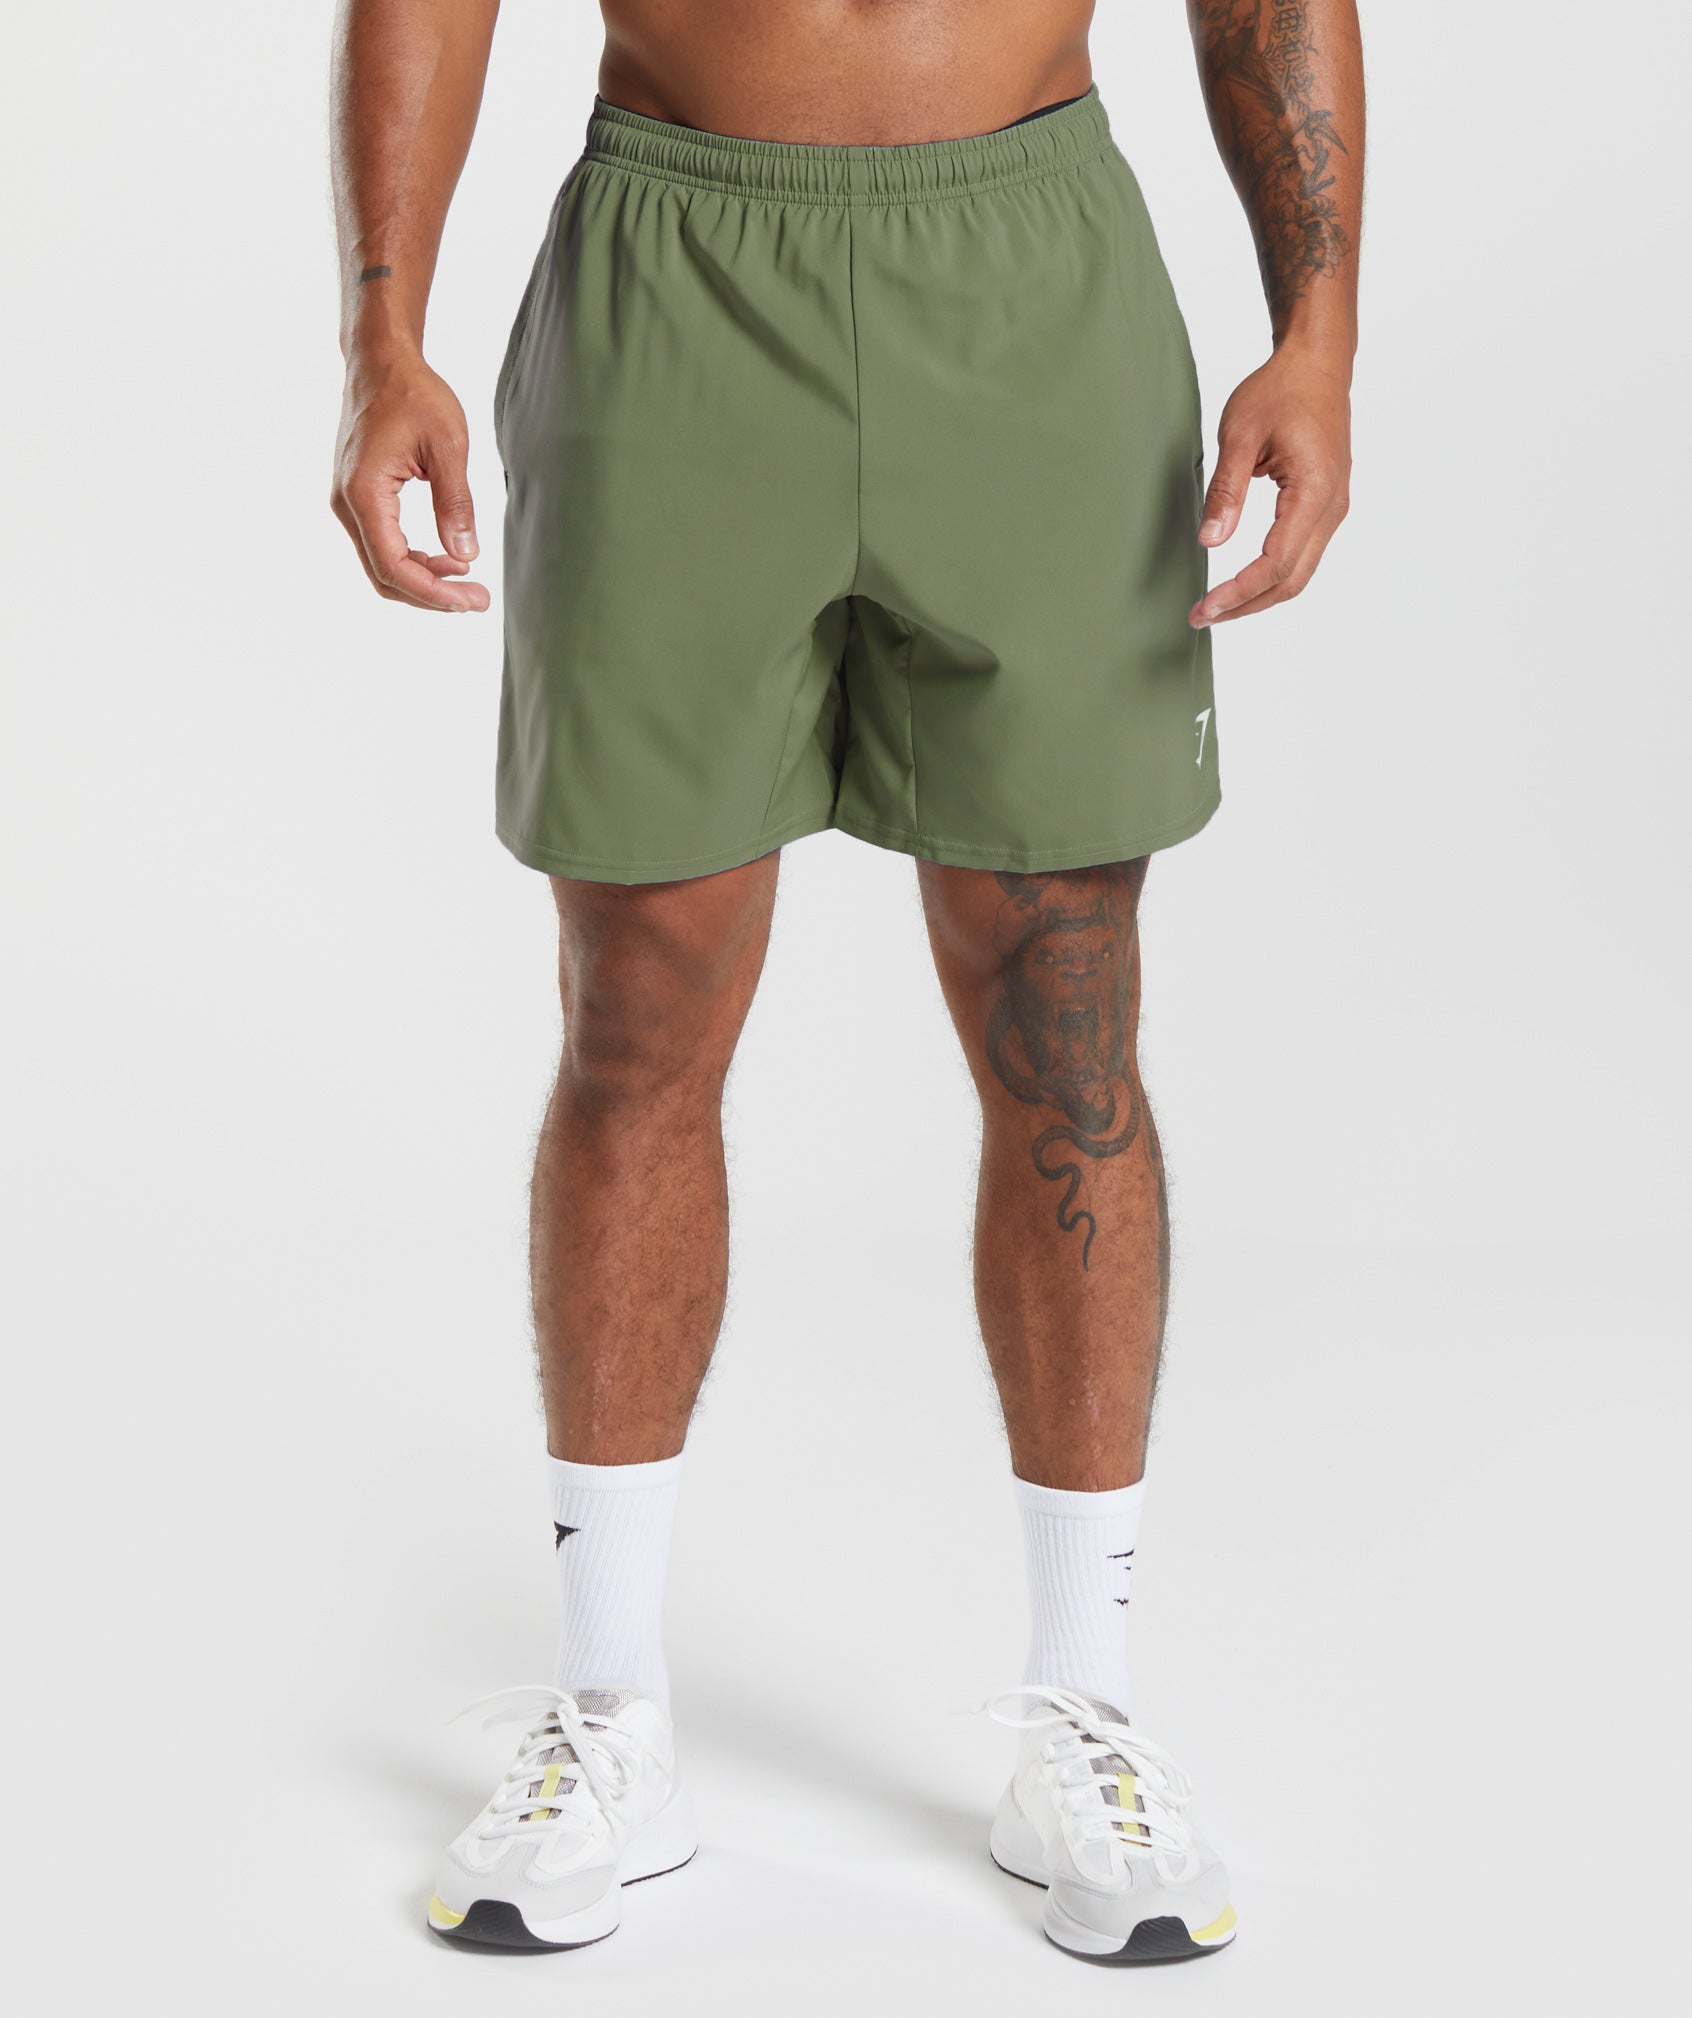 Arrival 7" Shorts in Core Olive